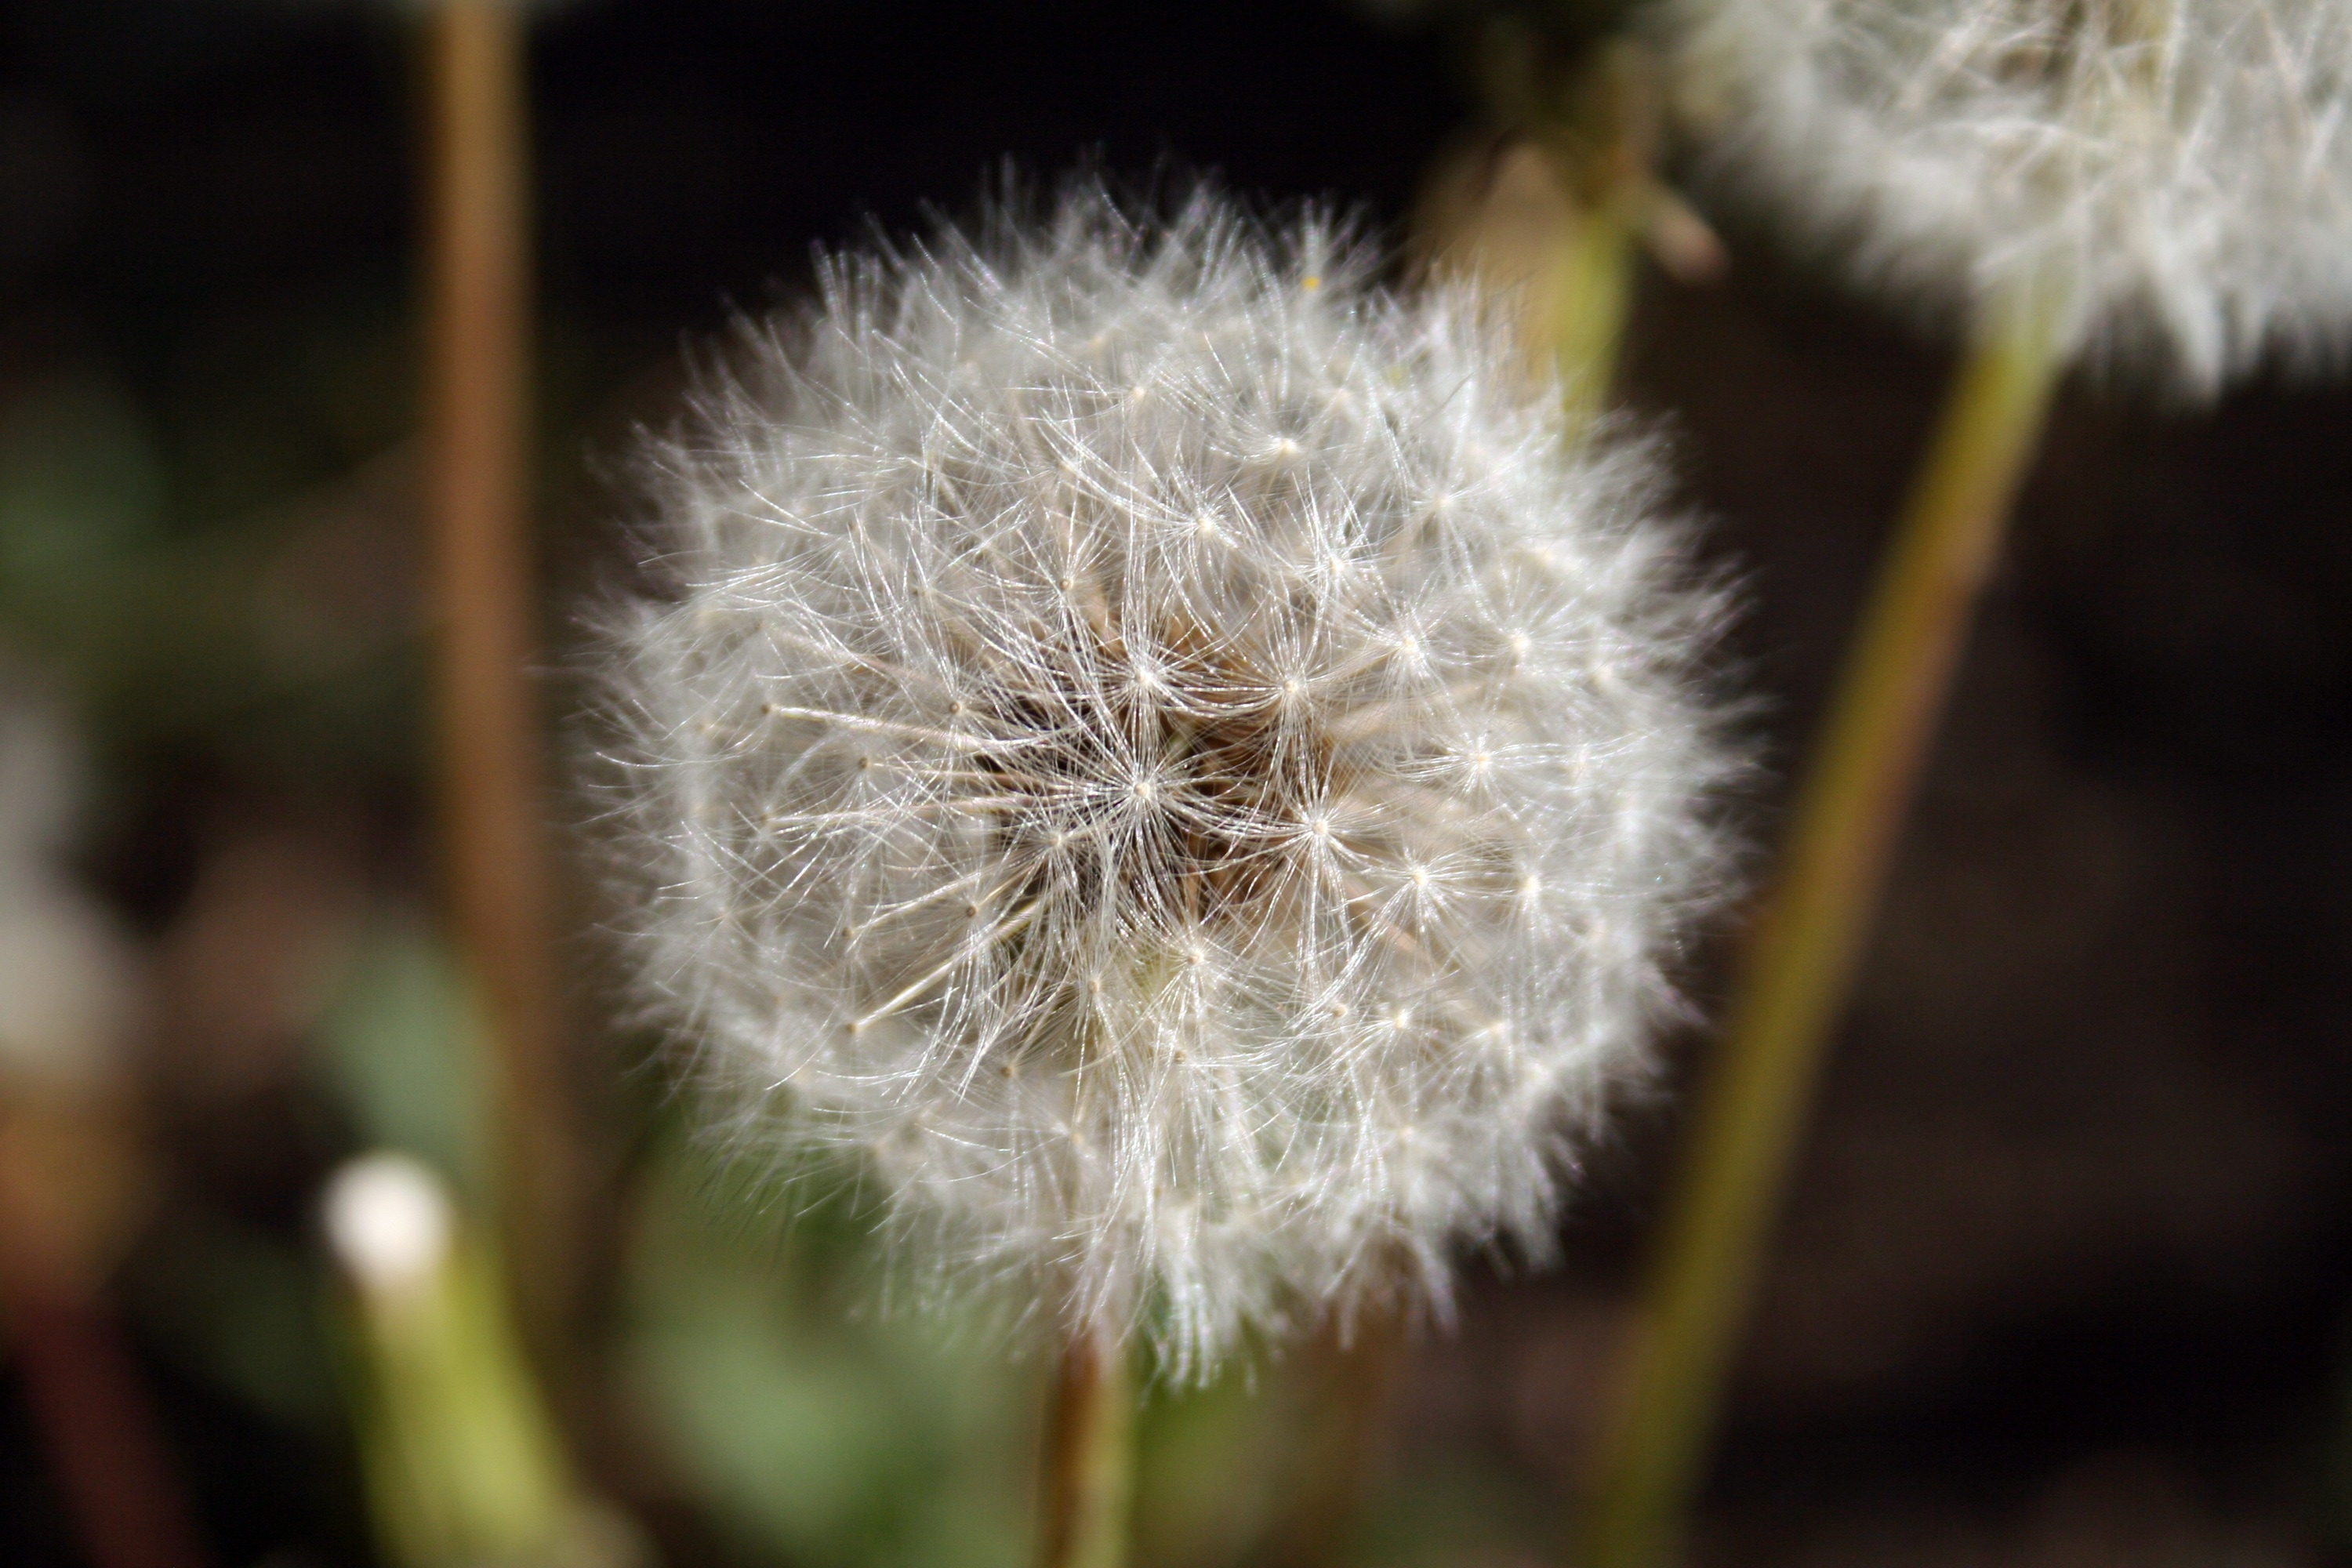 dandelion seed head in close up photography